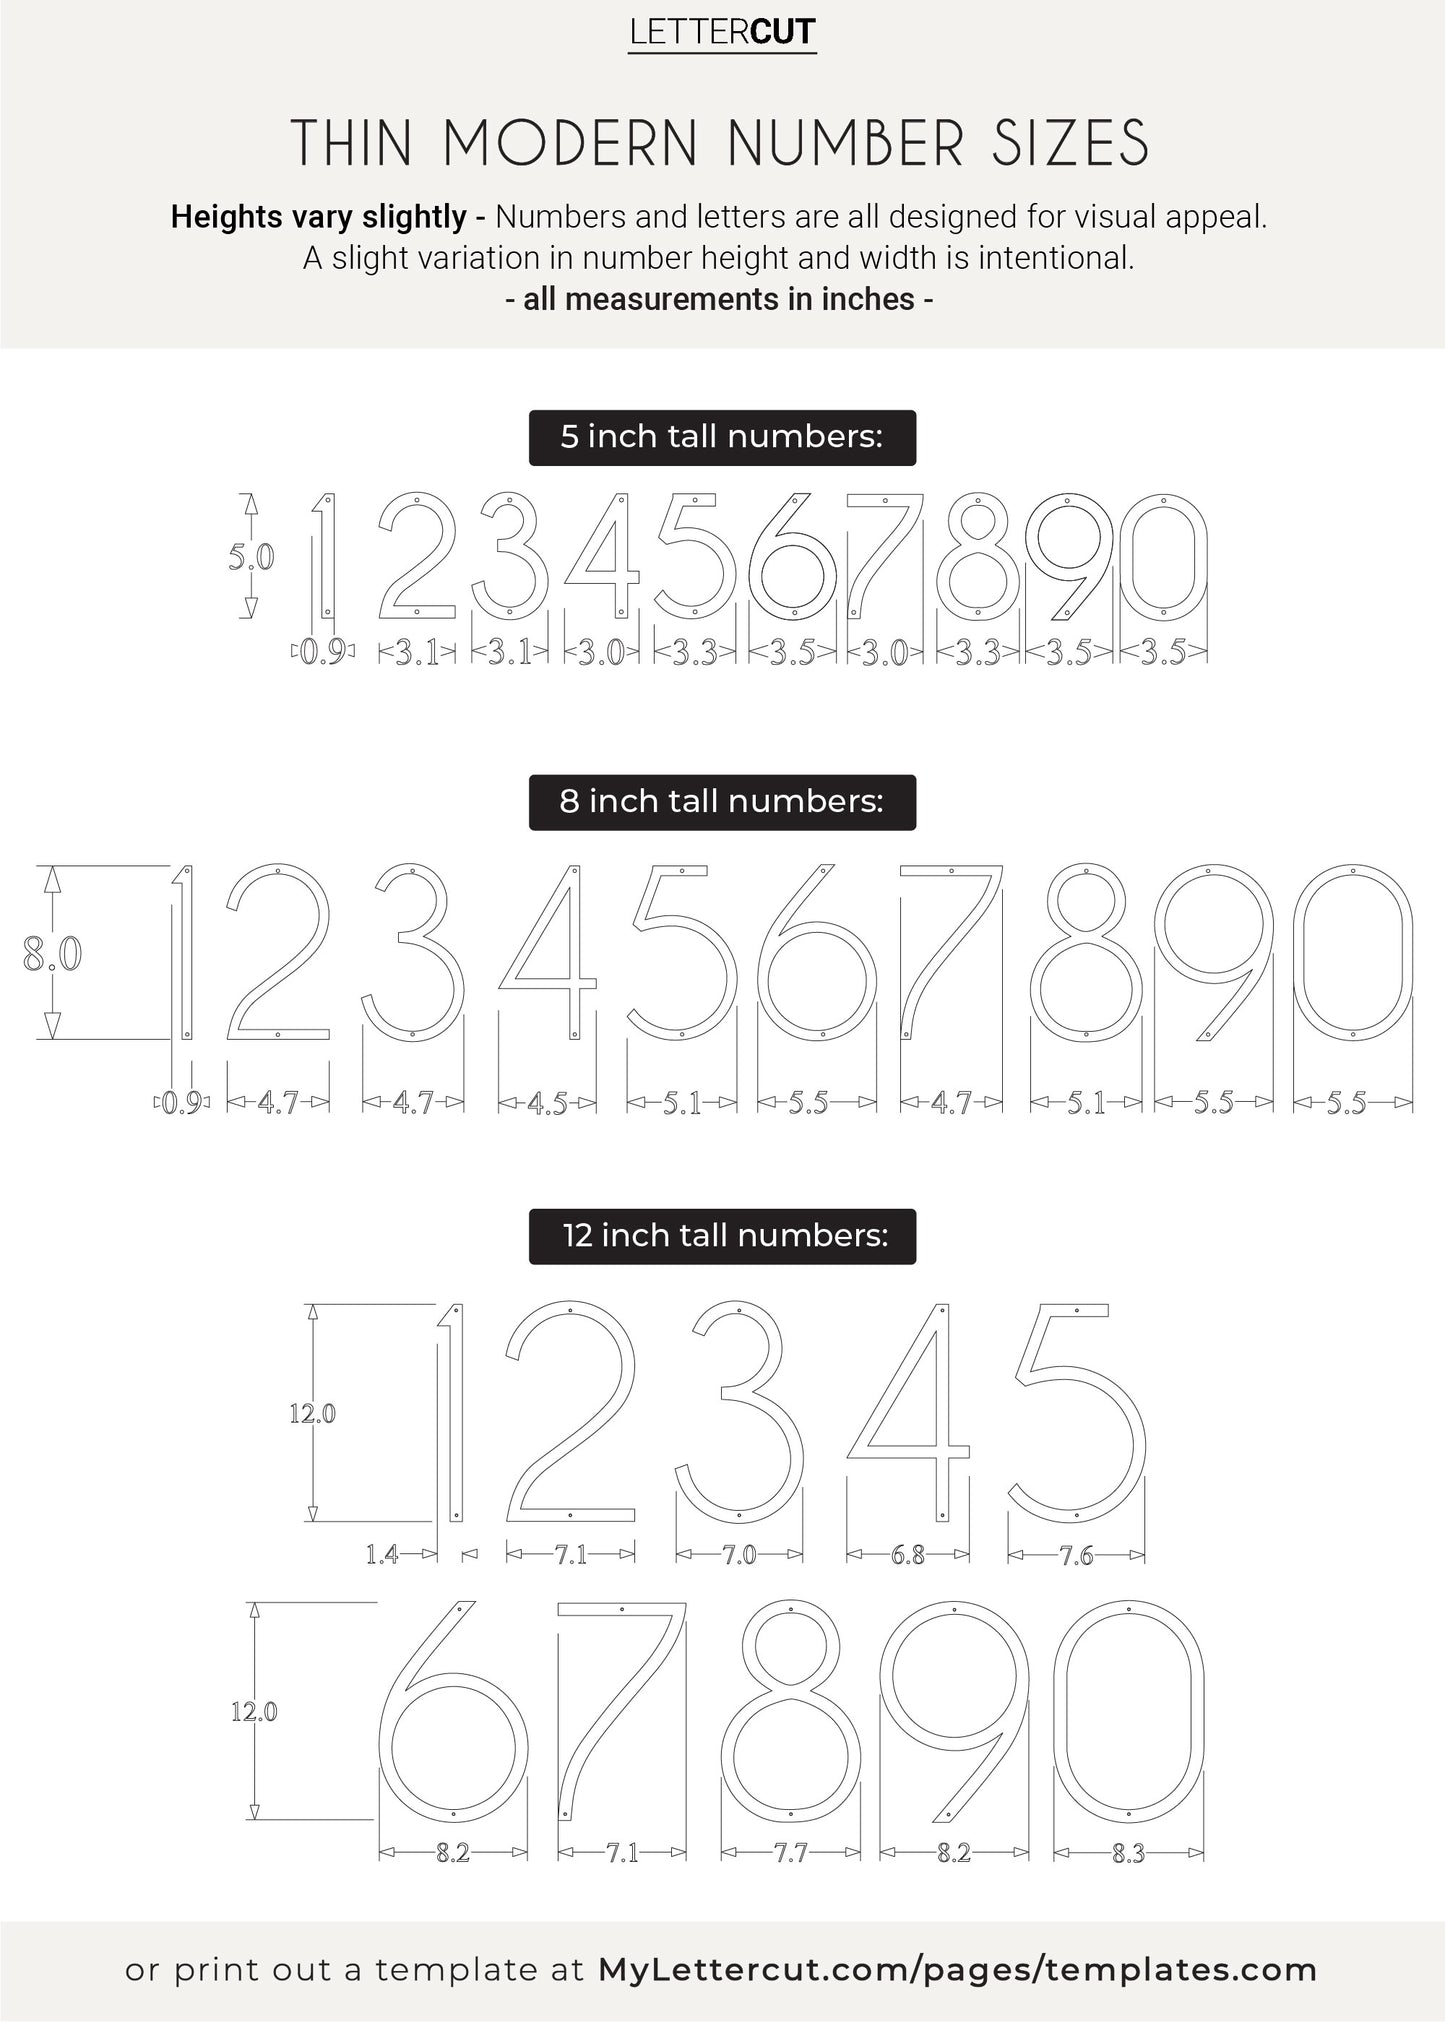 THIN MODERN house number sizes and measurements